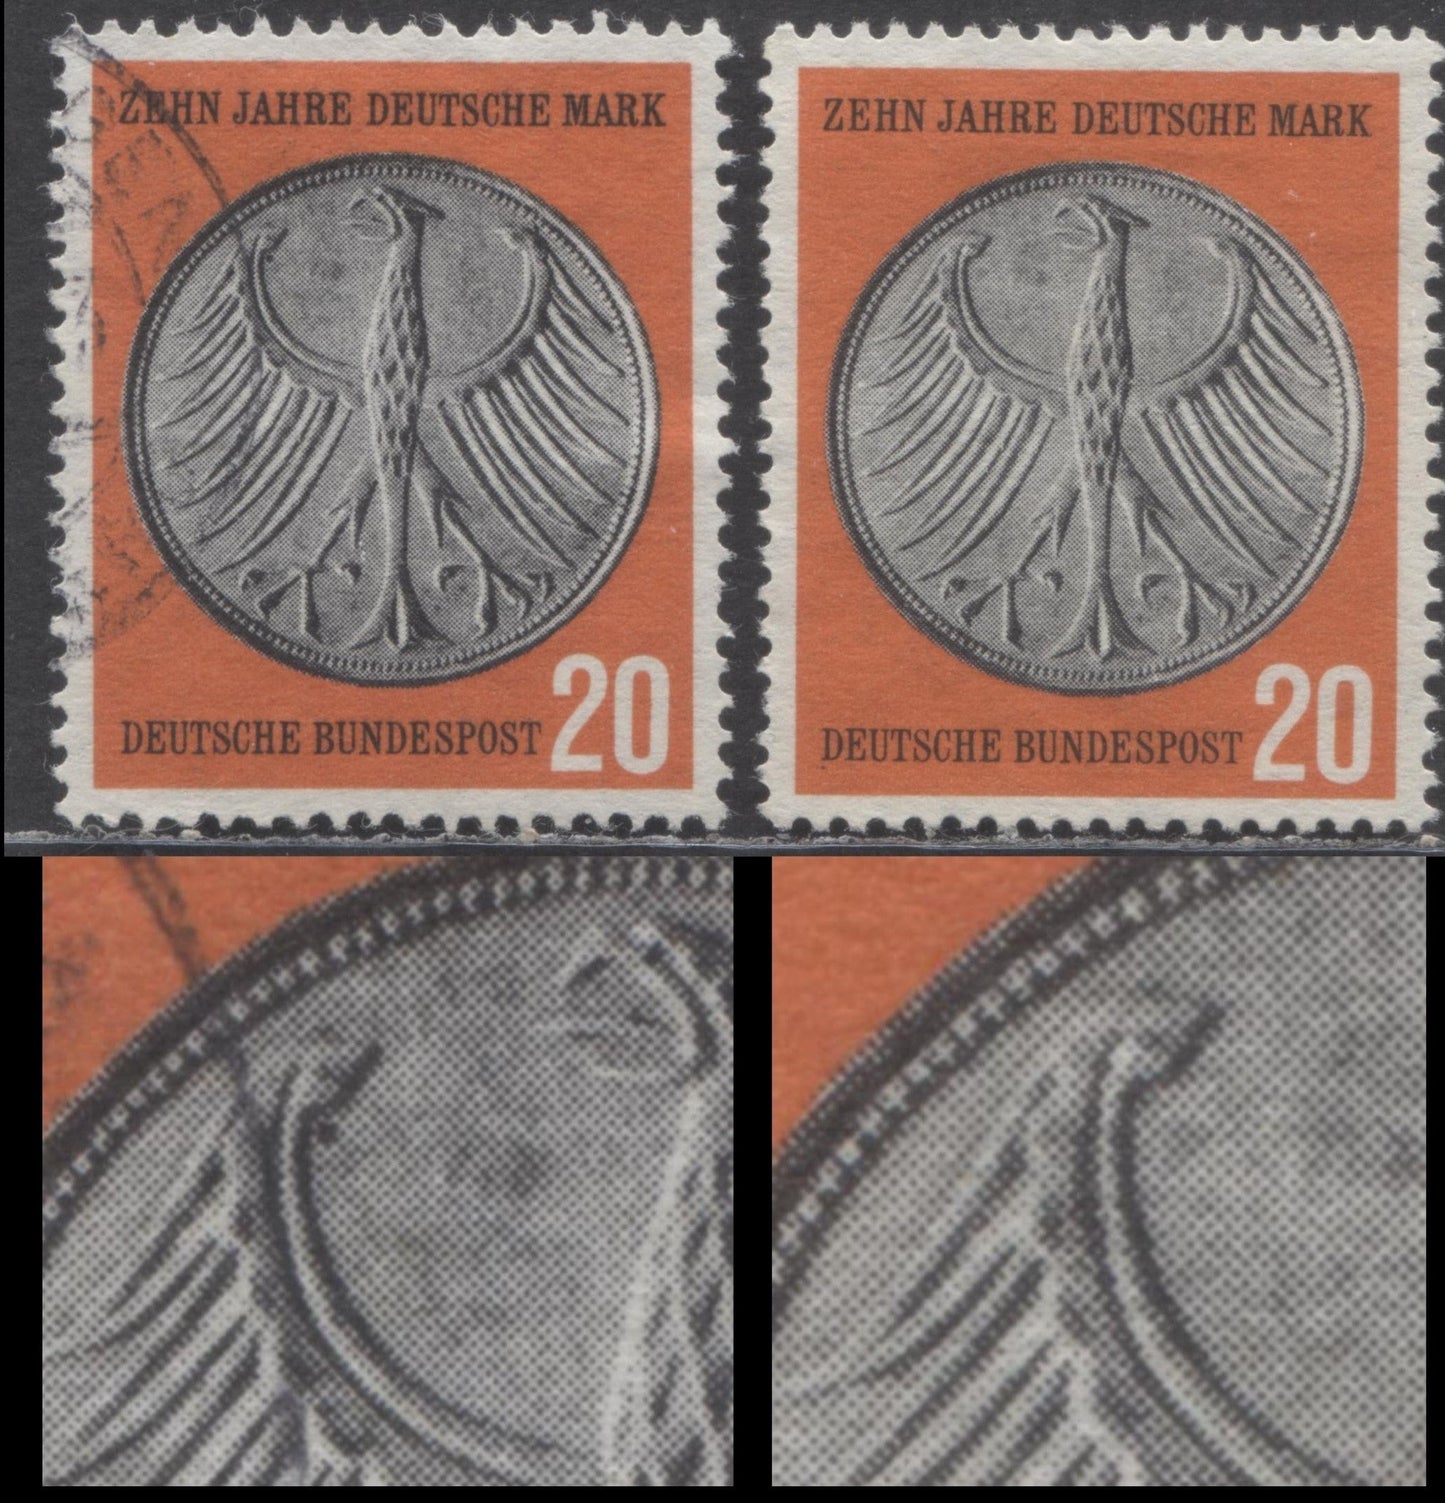 Lot 69 Germany Mi#291III (SC# 787) 20pf Red & Black 1958 German Currency Reform Issue, With Black Dot By Wing Tip From Pos. 2, 2 Very Fine Used Singles, Click on Listing to See ALL Pictures, Estimated Value $20